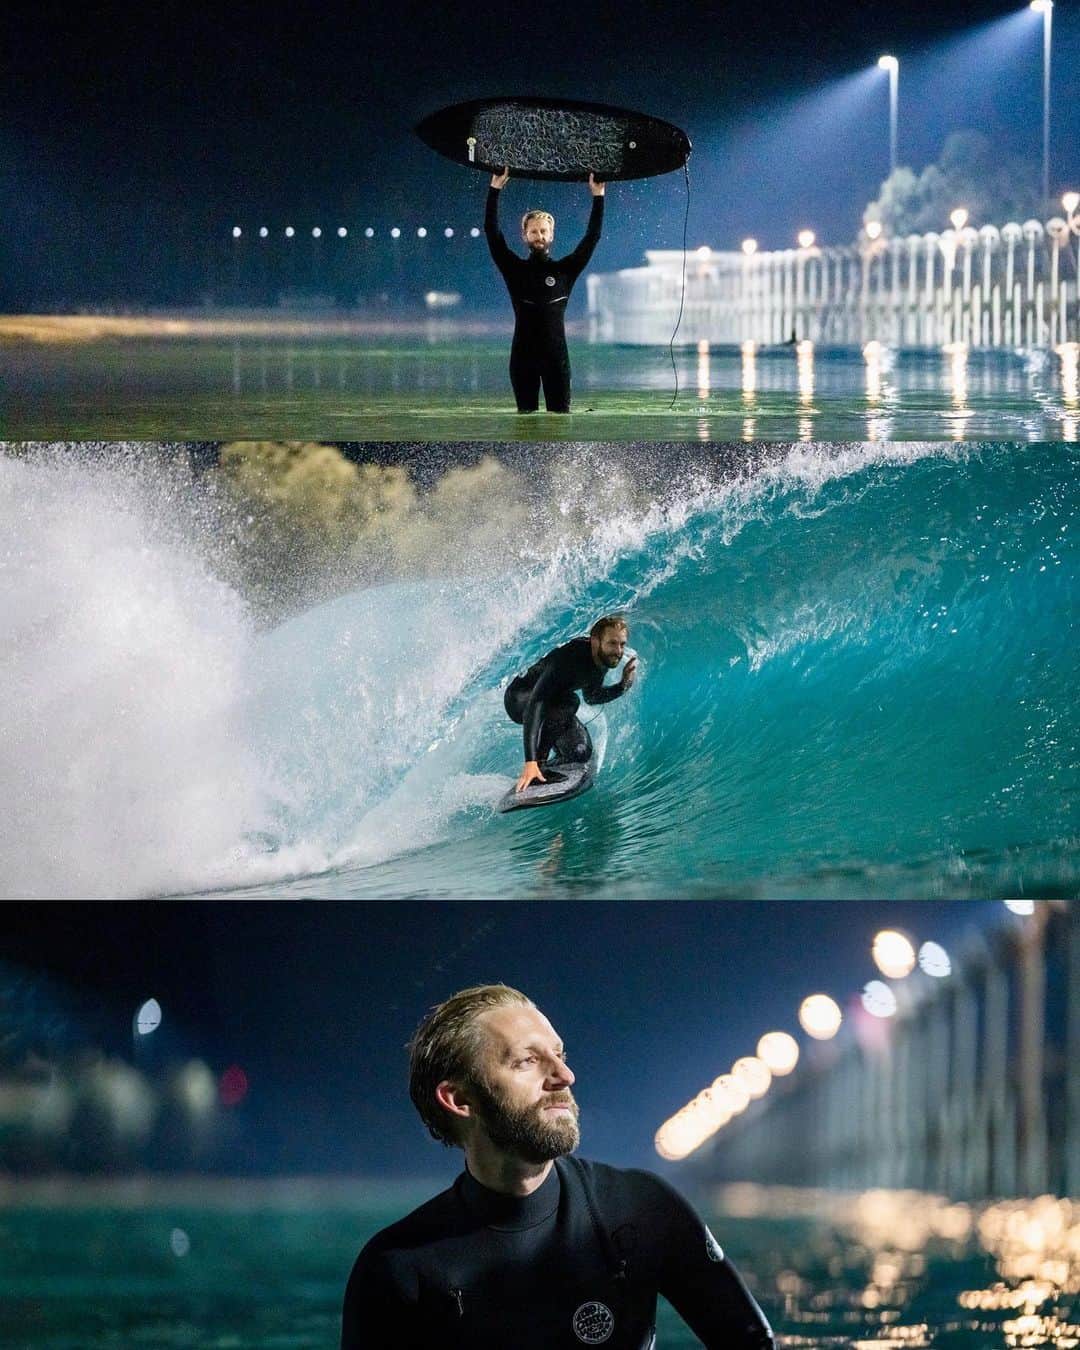 Travis Burkeのインスタグラム：「An experience of a lifetime surfing Kelly Slater’s wave under the moon and stars!   This wave is surprisingly challenging to surf, the freezing conditions and darkness of the night certainly added to the challenge.   From the hospitality, to the farm to table meals, and overnight lodging, everything about this place is over the top and is so much more than just a perfect wave.    Huge thanks to @proudsourcewater for the opportunity and @layseahughes for spending all day and night in the water capturing these moments!   #surfranch #wavepool #proundwavemaker」